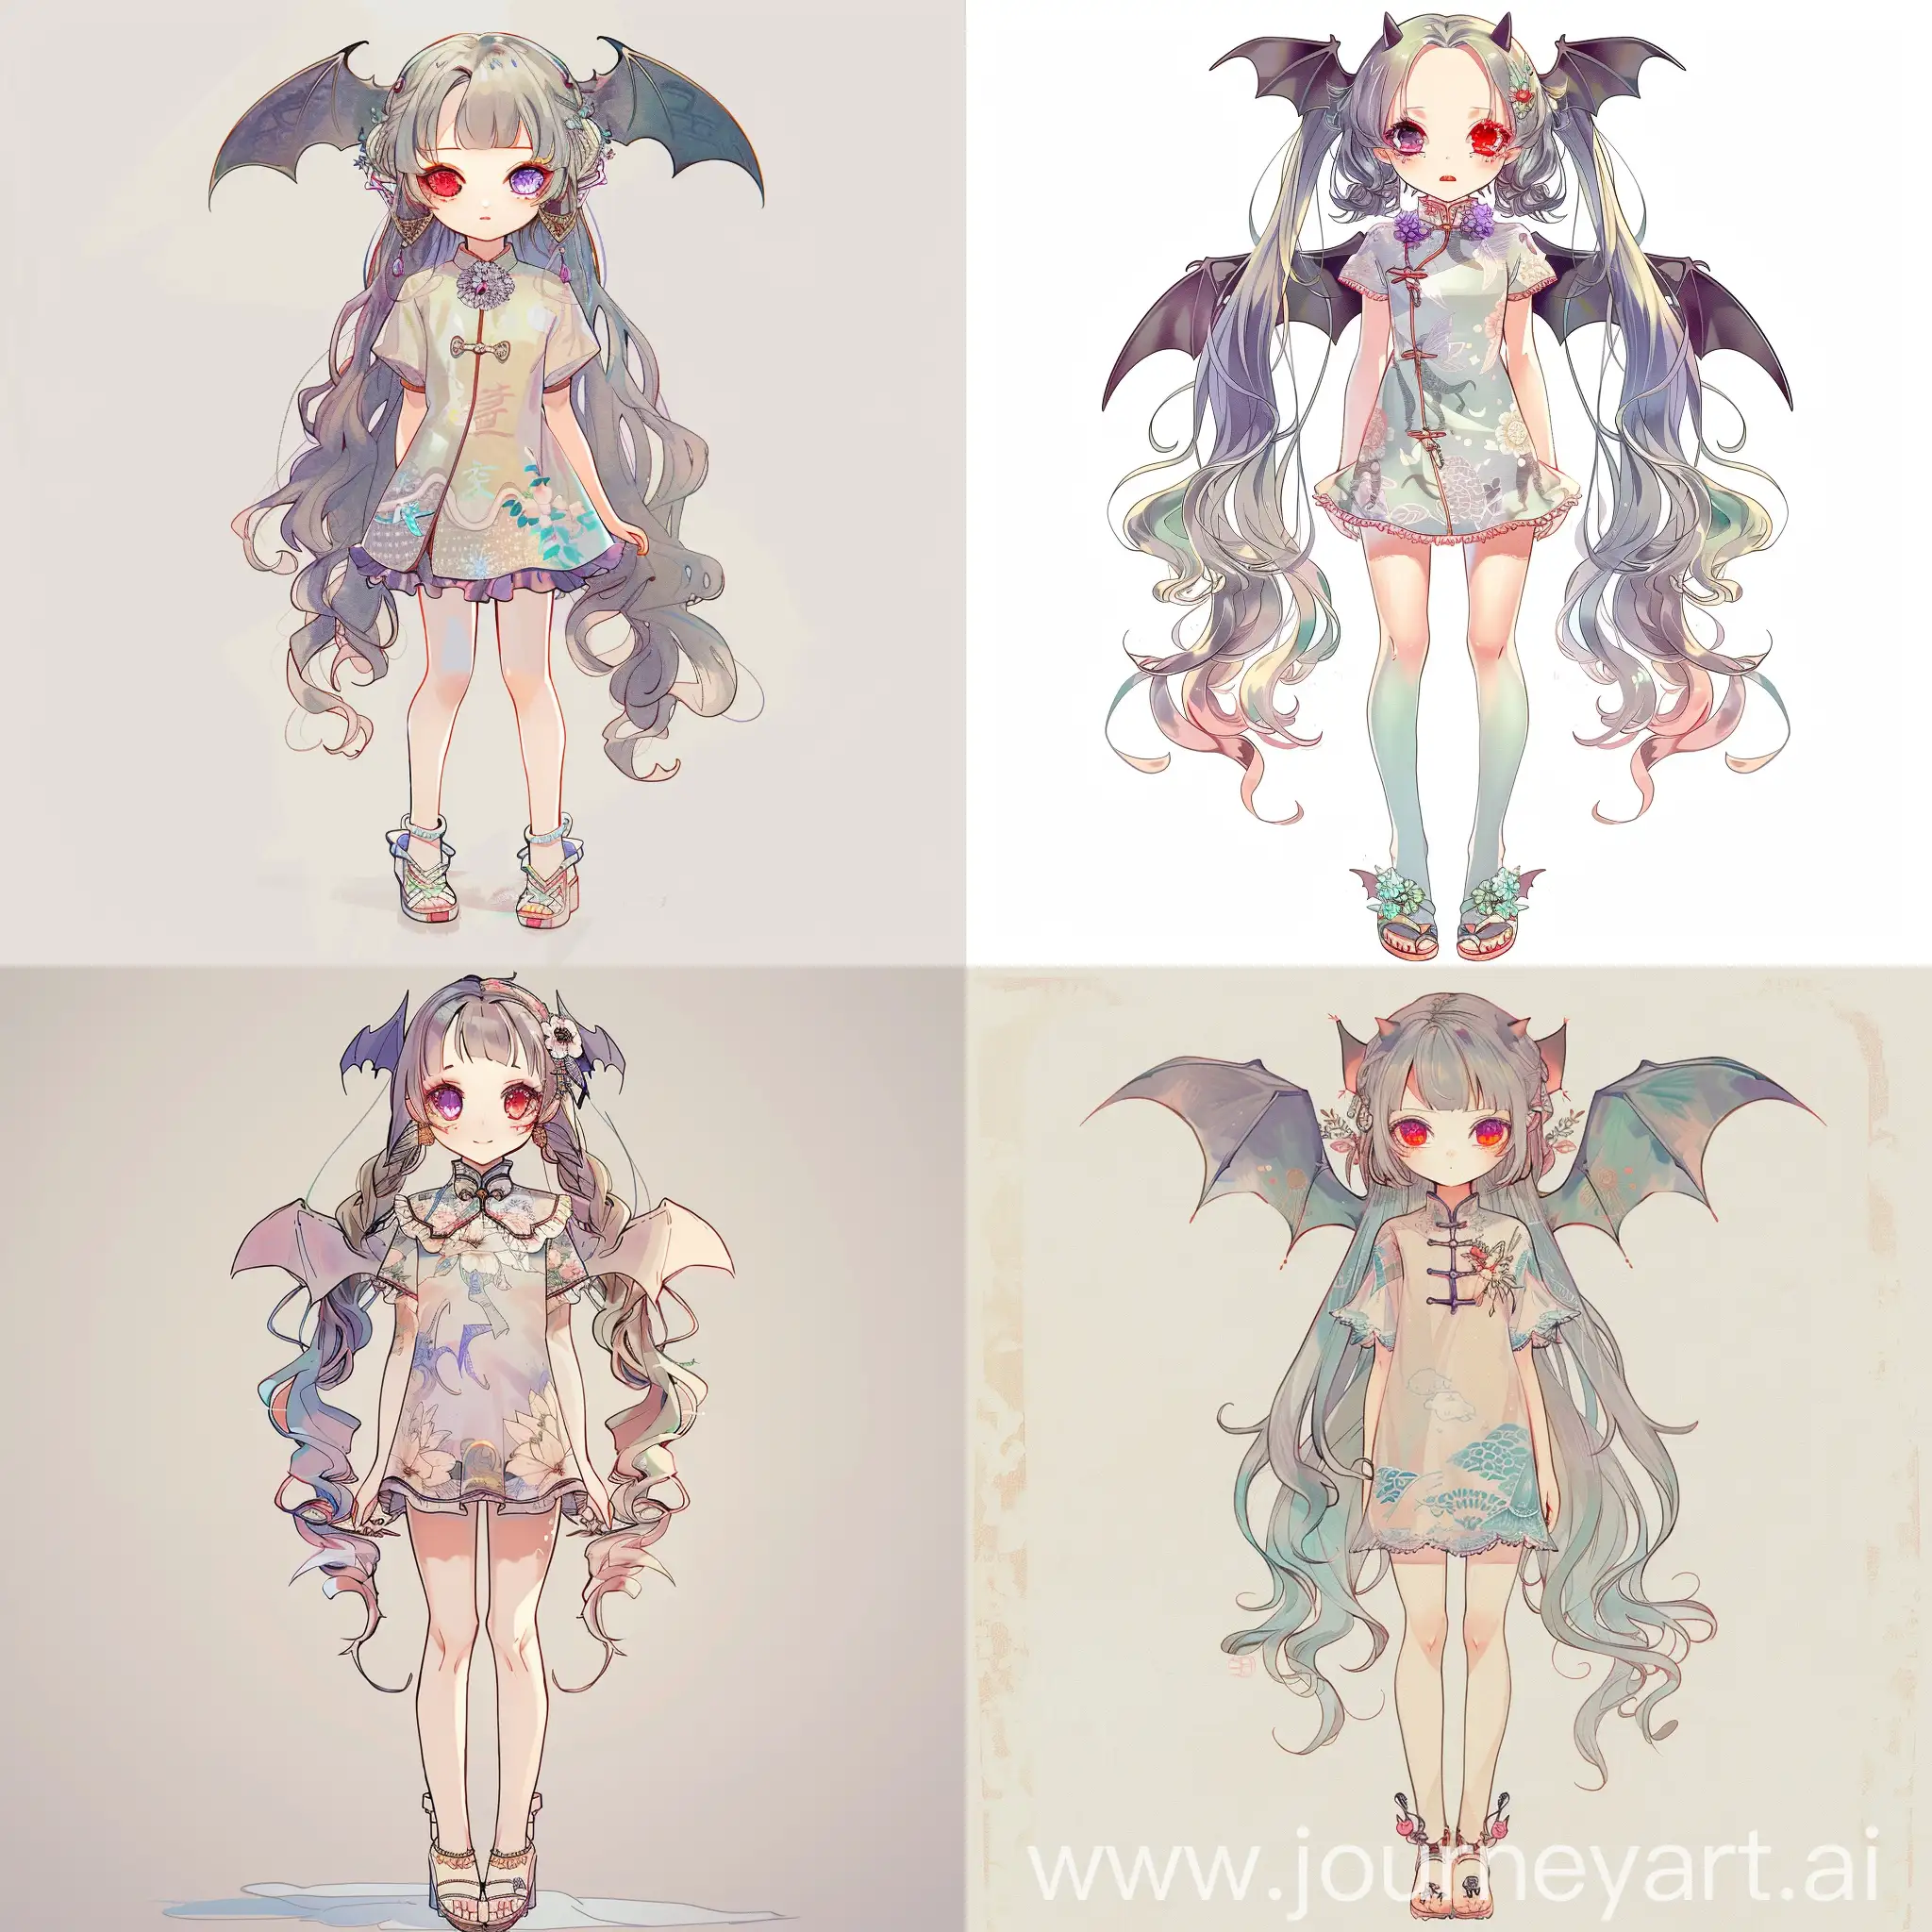 girl, long hair slightly curly at the ends, heterochromia, two pairs of eyes, red eyes, purple eyes, small bat wings growing from the back of her head, short dress in oriental style, without patterns, pastel color palette, flower decoration on the neck, platform shoes, full length